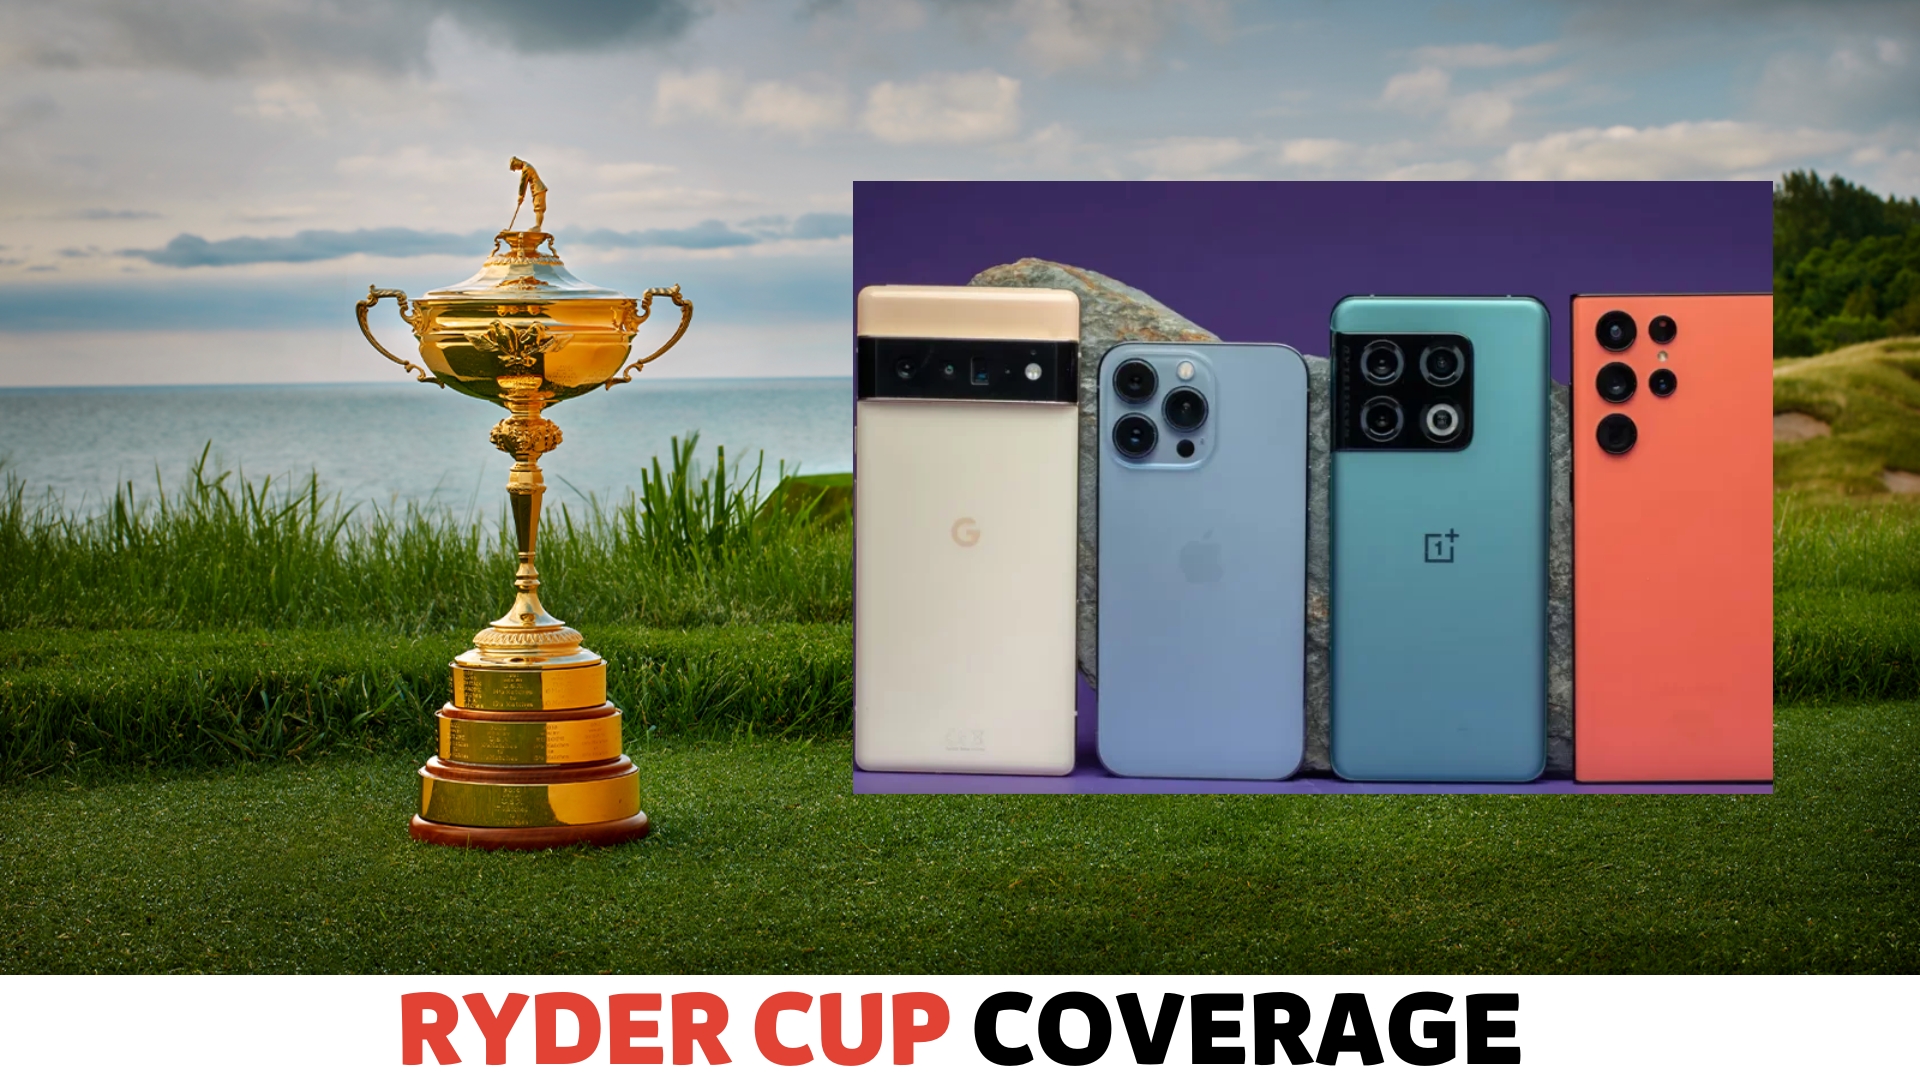 How to Watch Ryder Cup on Phone